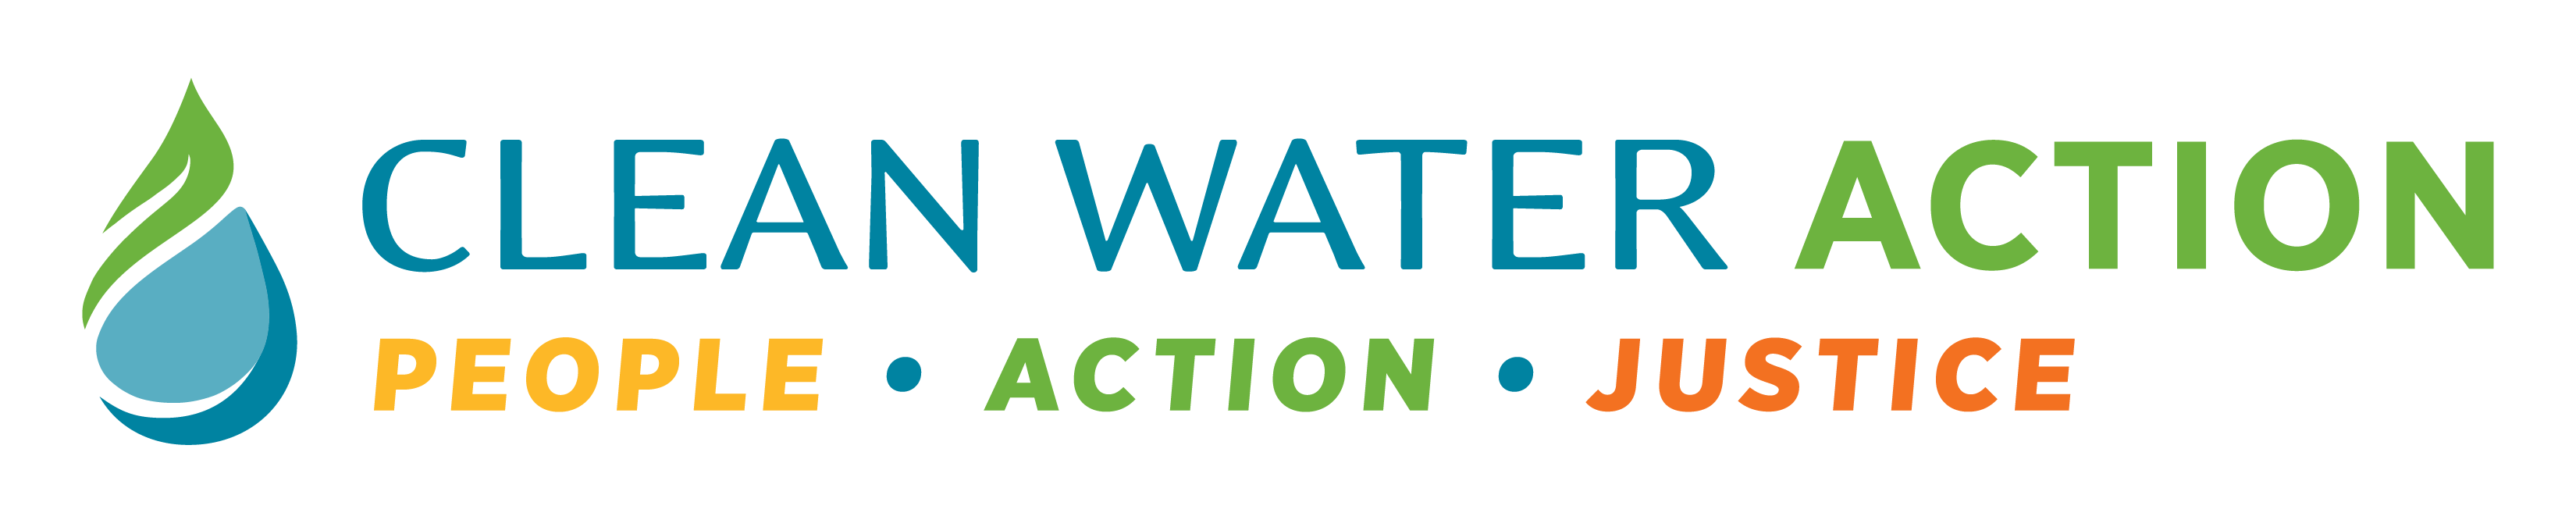 Clean Water Action: People Action Justice